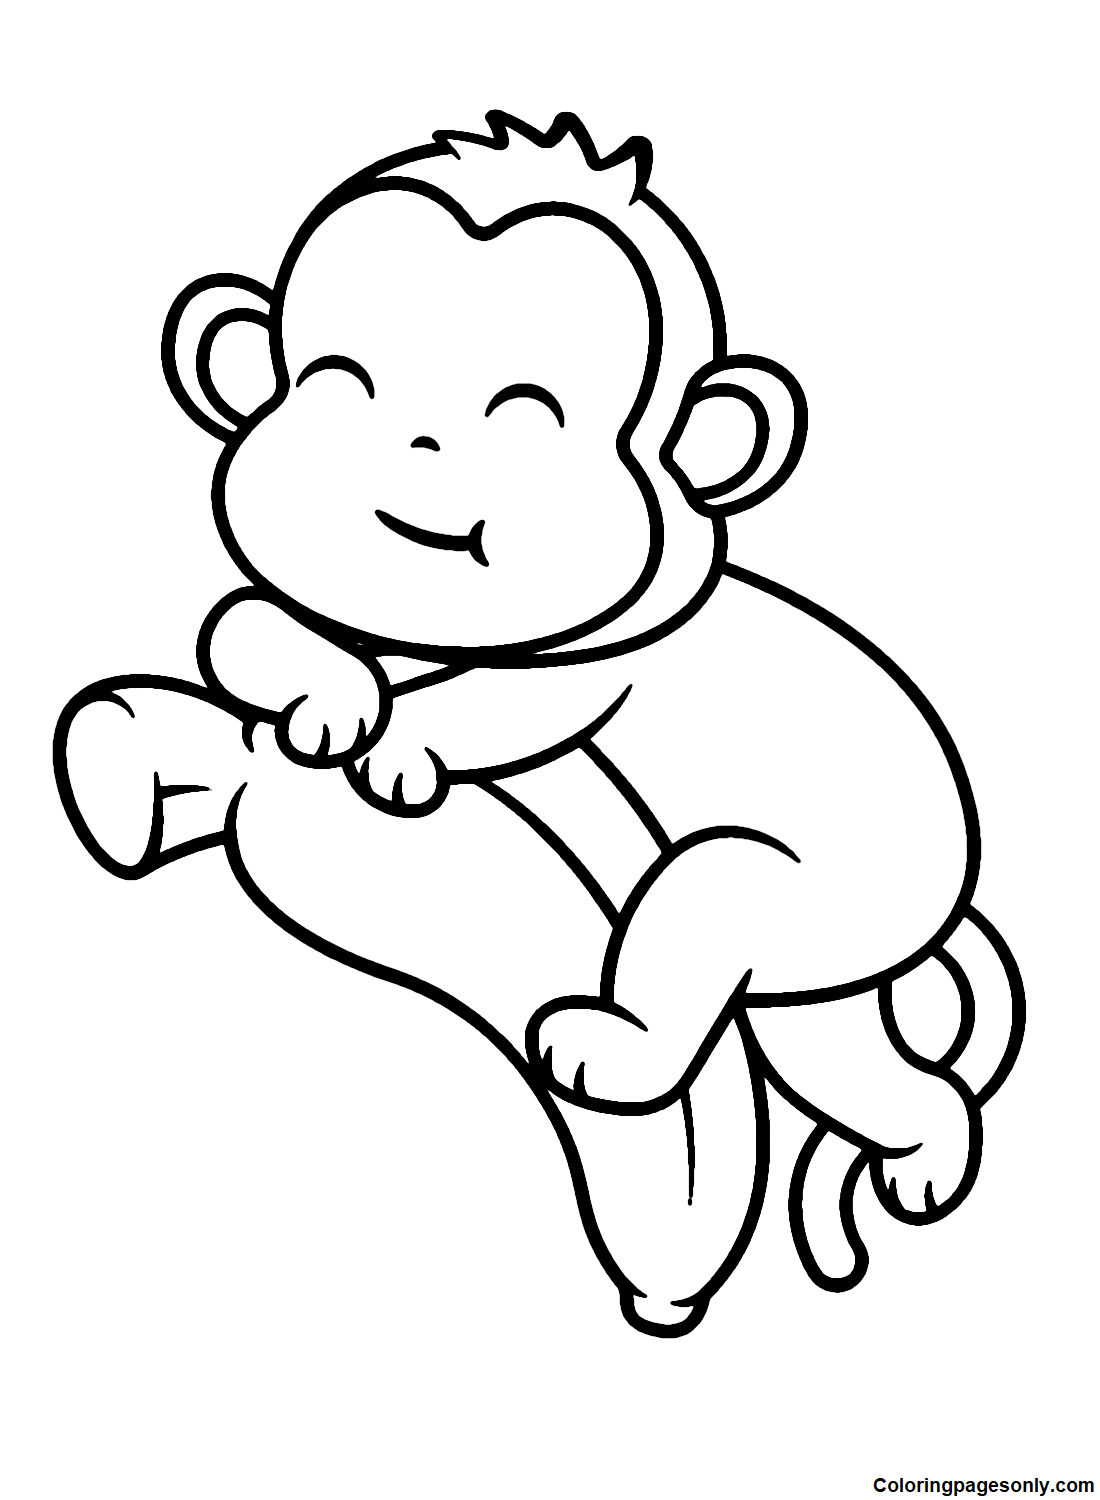 Cute Monkey with Banana Coloring Pages